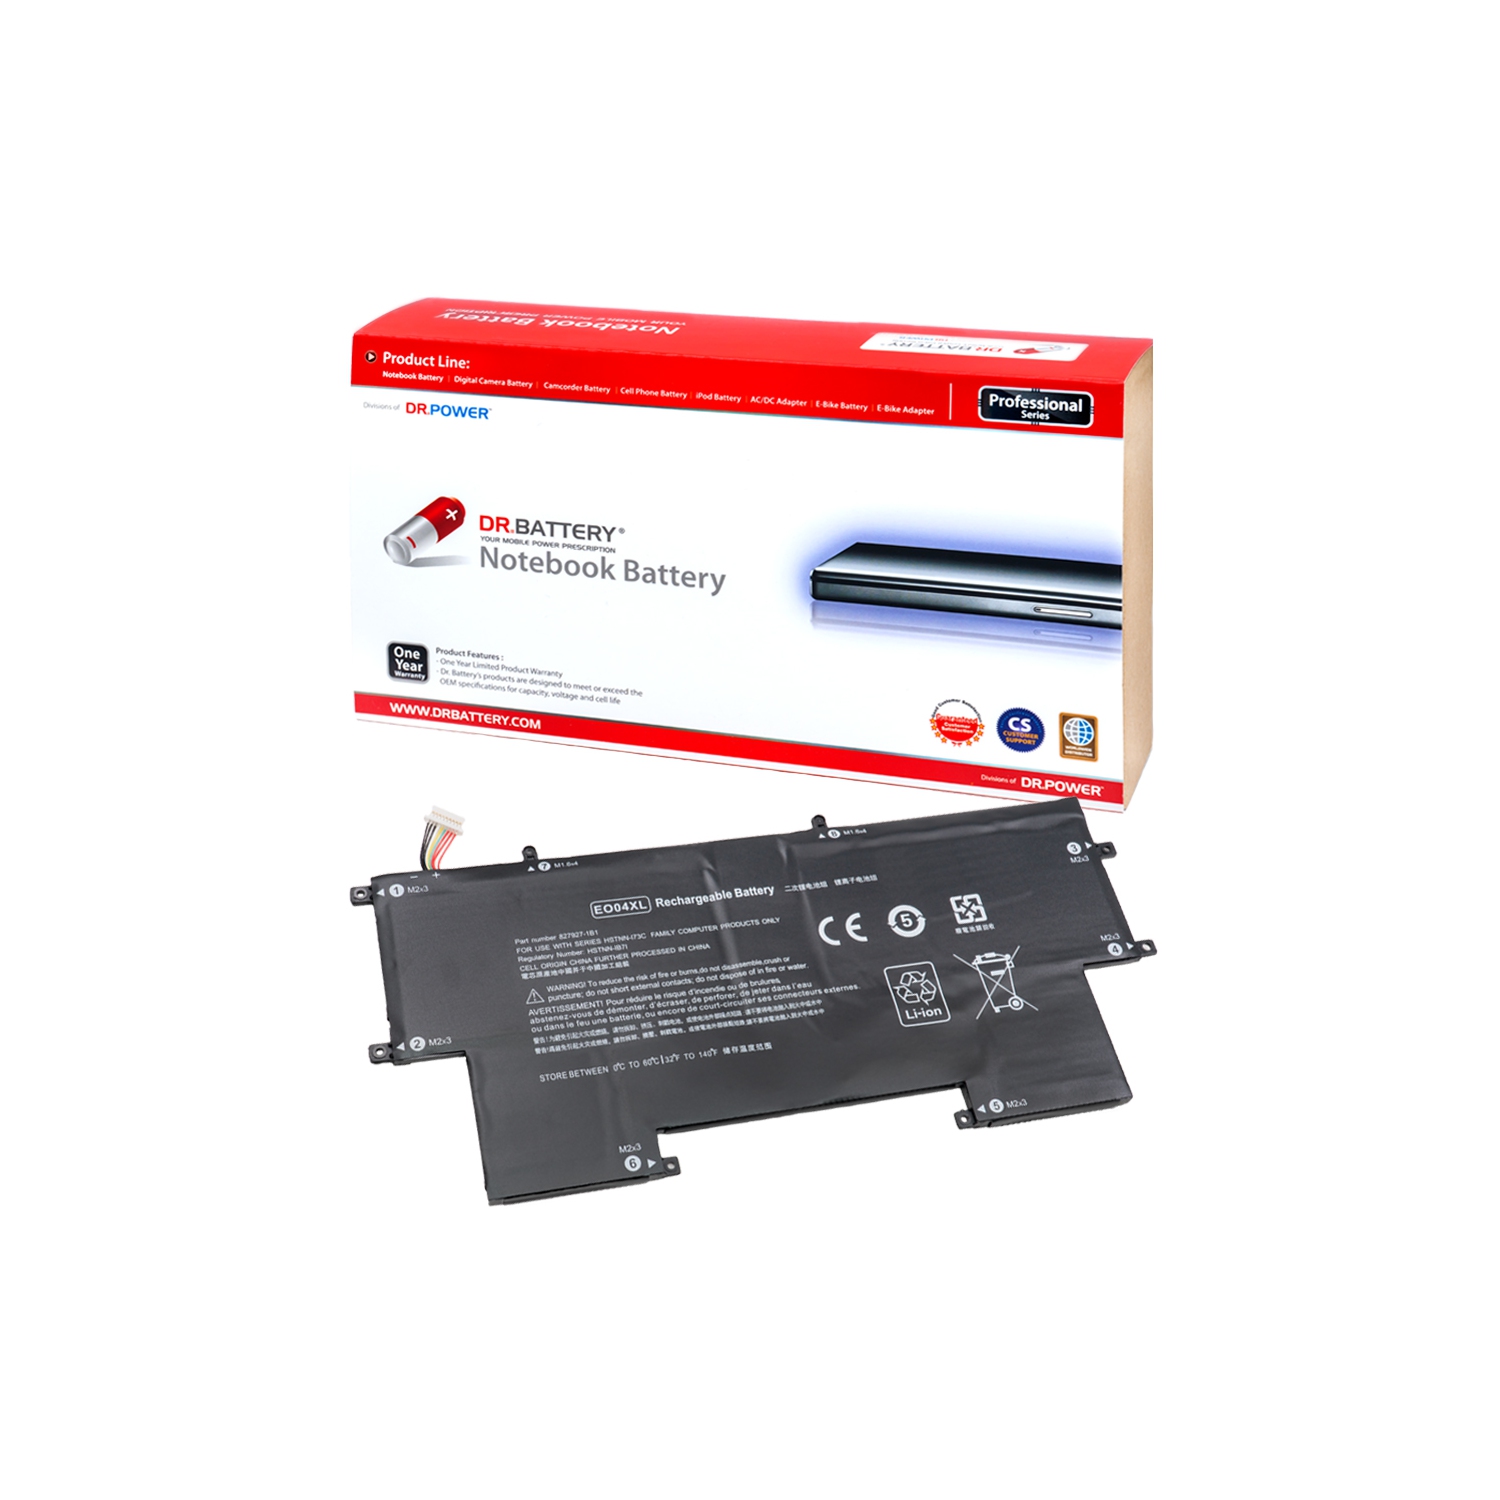 DR. BATTERY Replacement for HP EliteBook Folio G1 1EN92ES P2C88AV P4P84PT HSTNN-IB7I 8279271B1 827927-1B1 [7.7V / 32Wh] **Free Shipping**